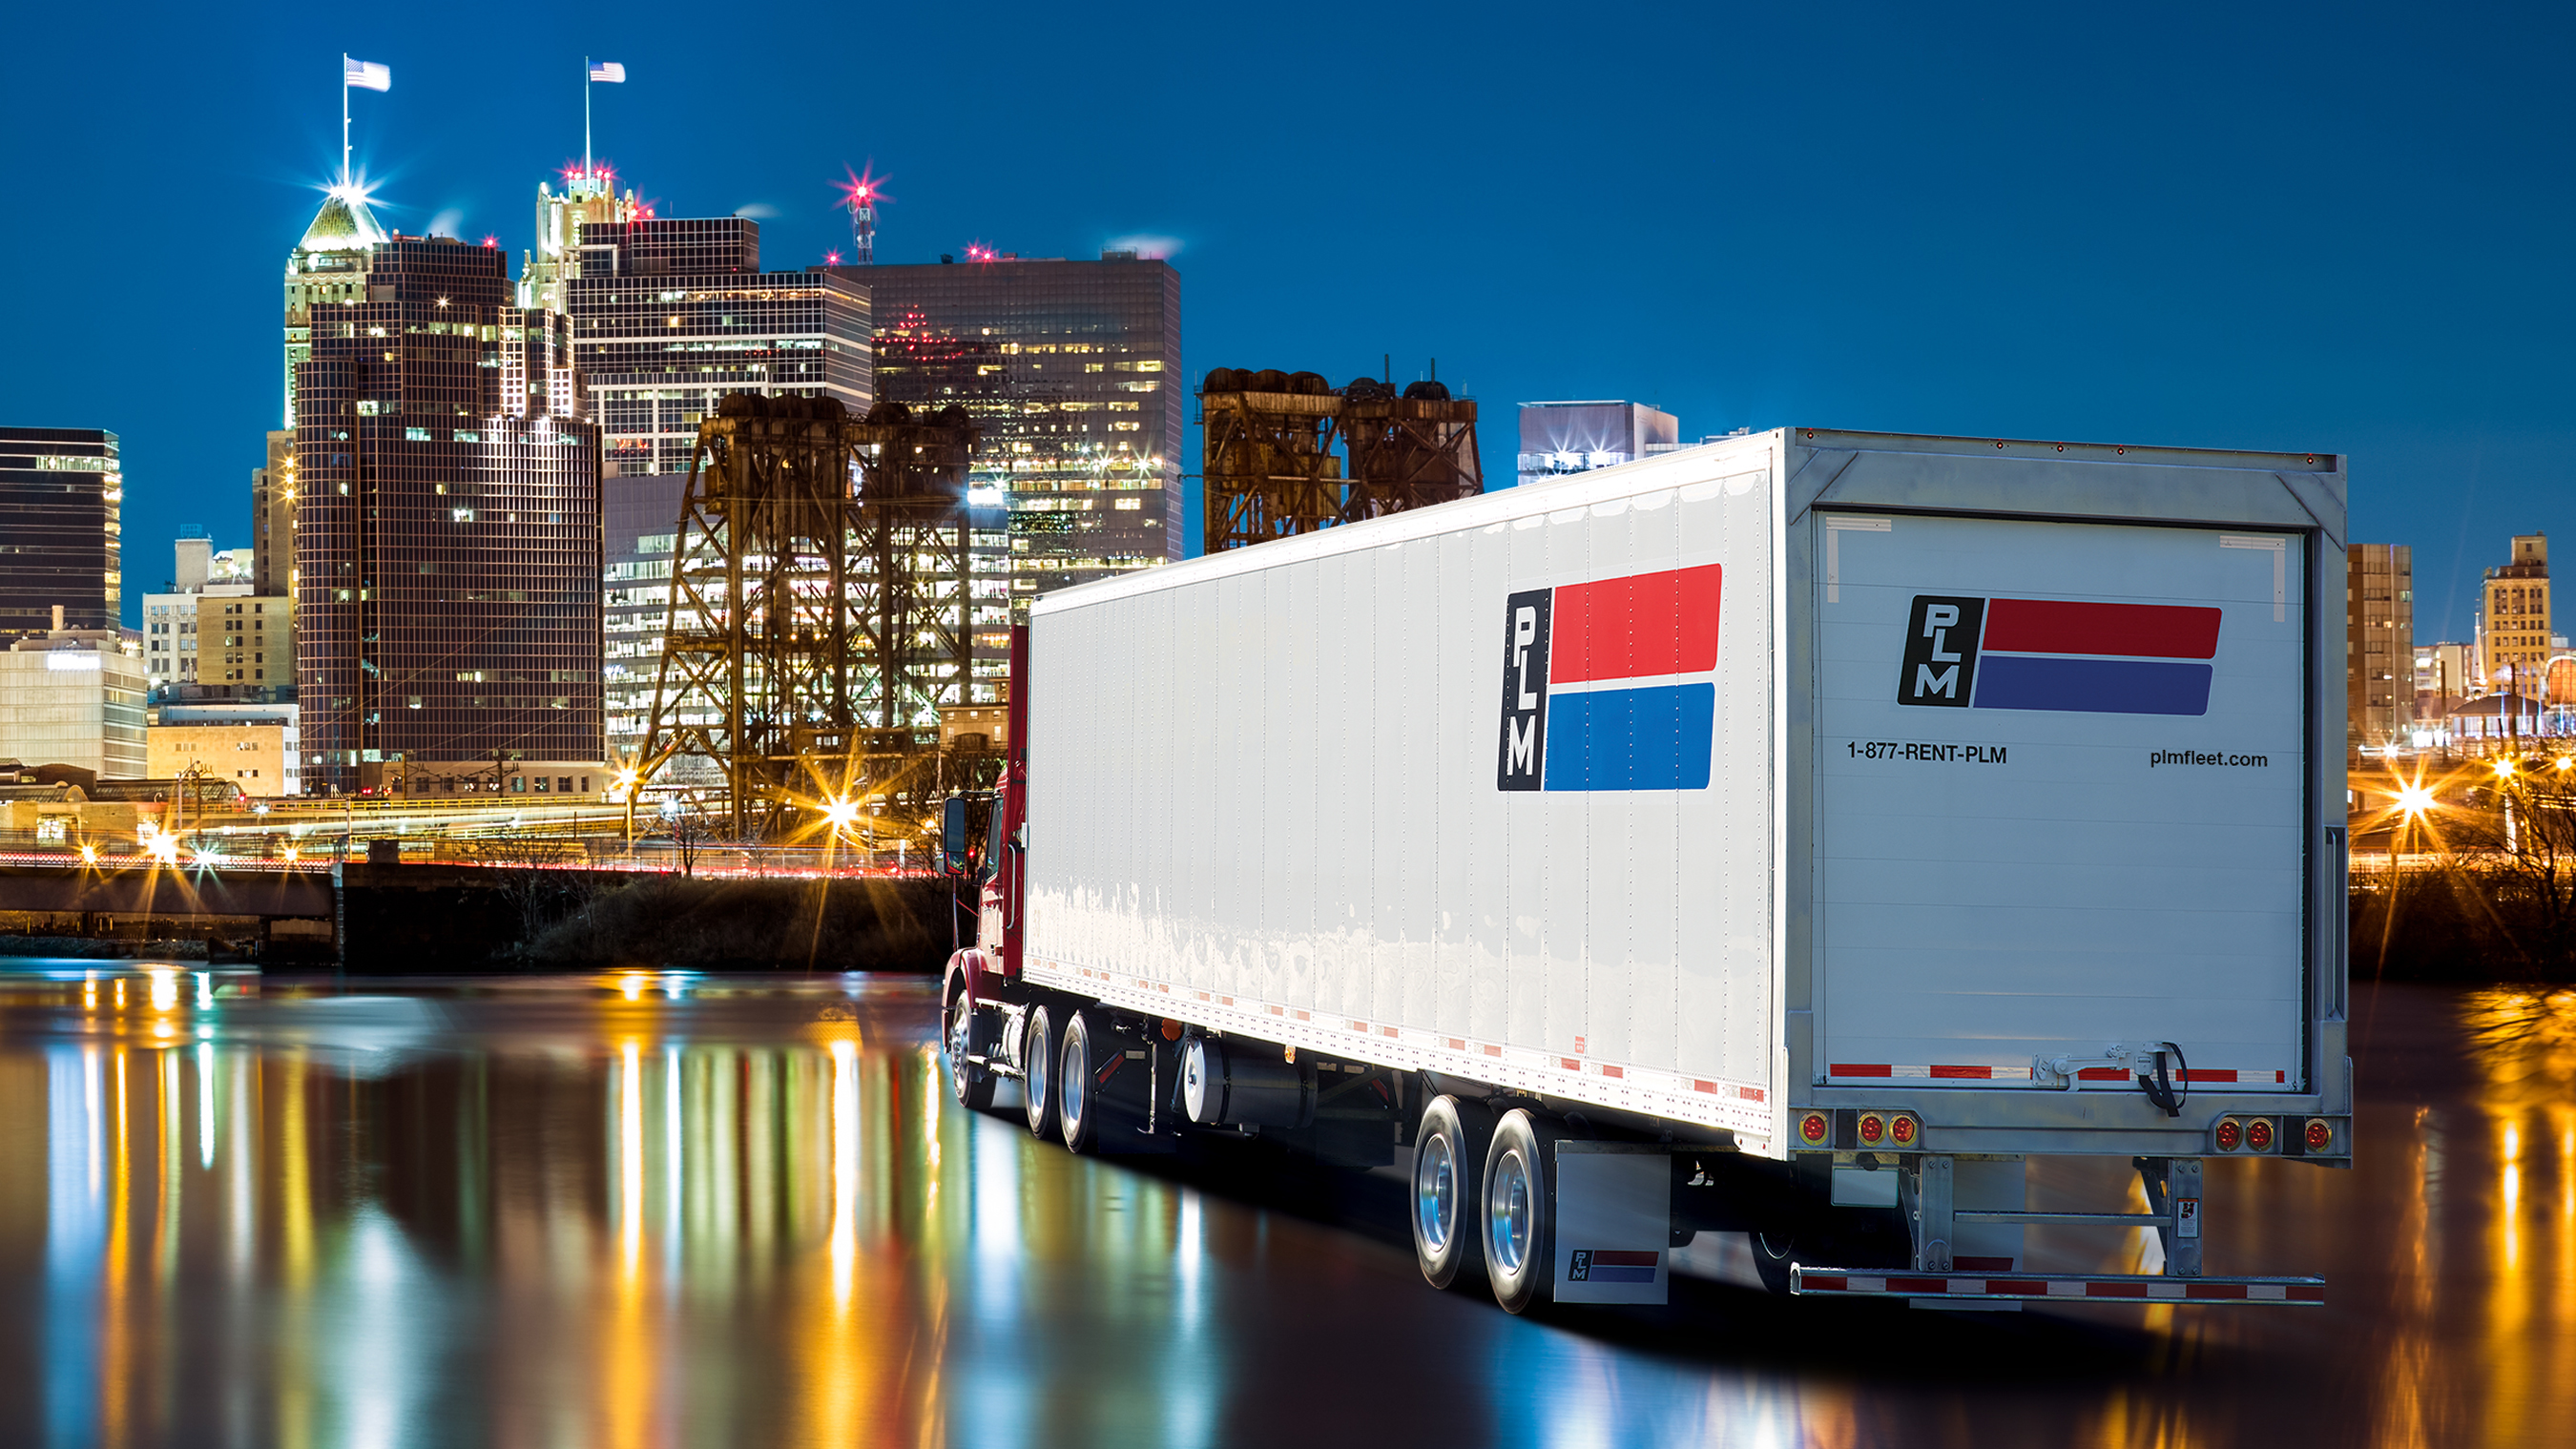 PLM Fleet refrigerated trailer in front of a night time Newark, NJ timeline where the PLM Fleet headquarters are located.